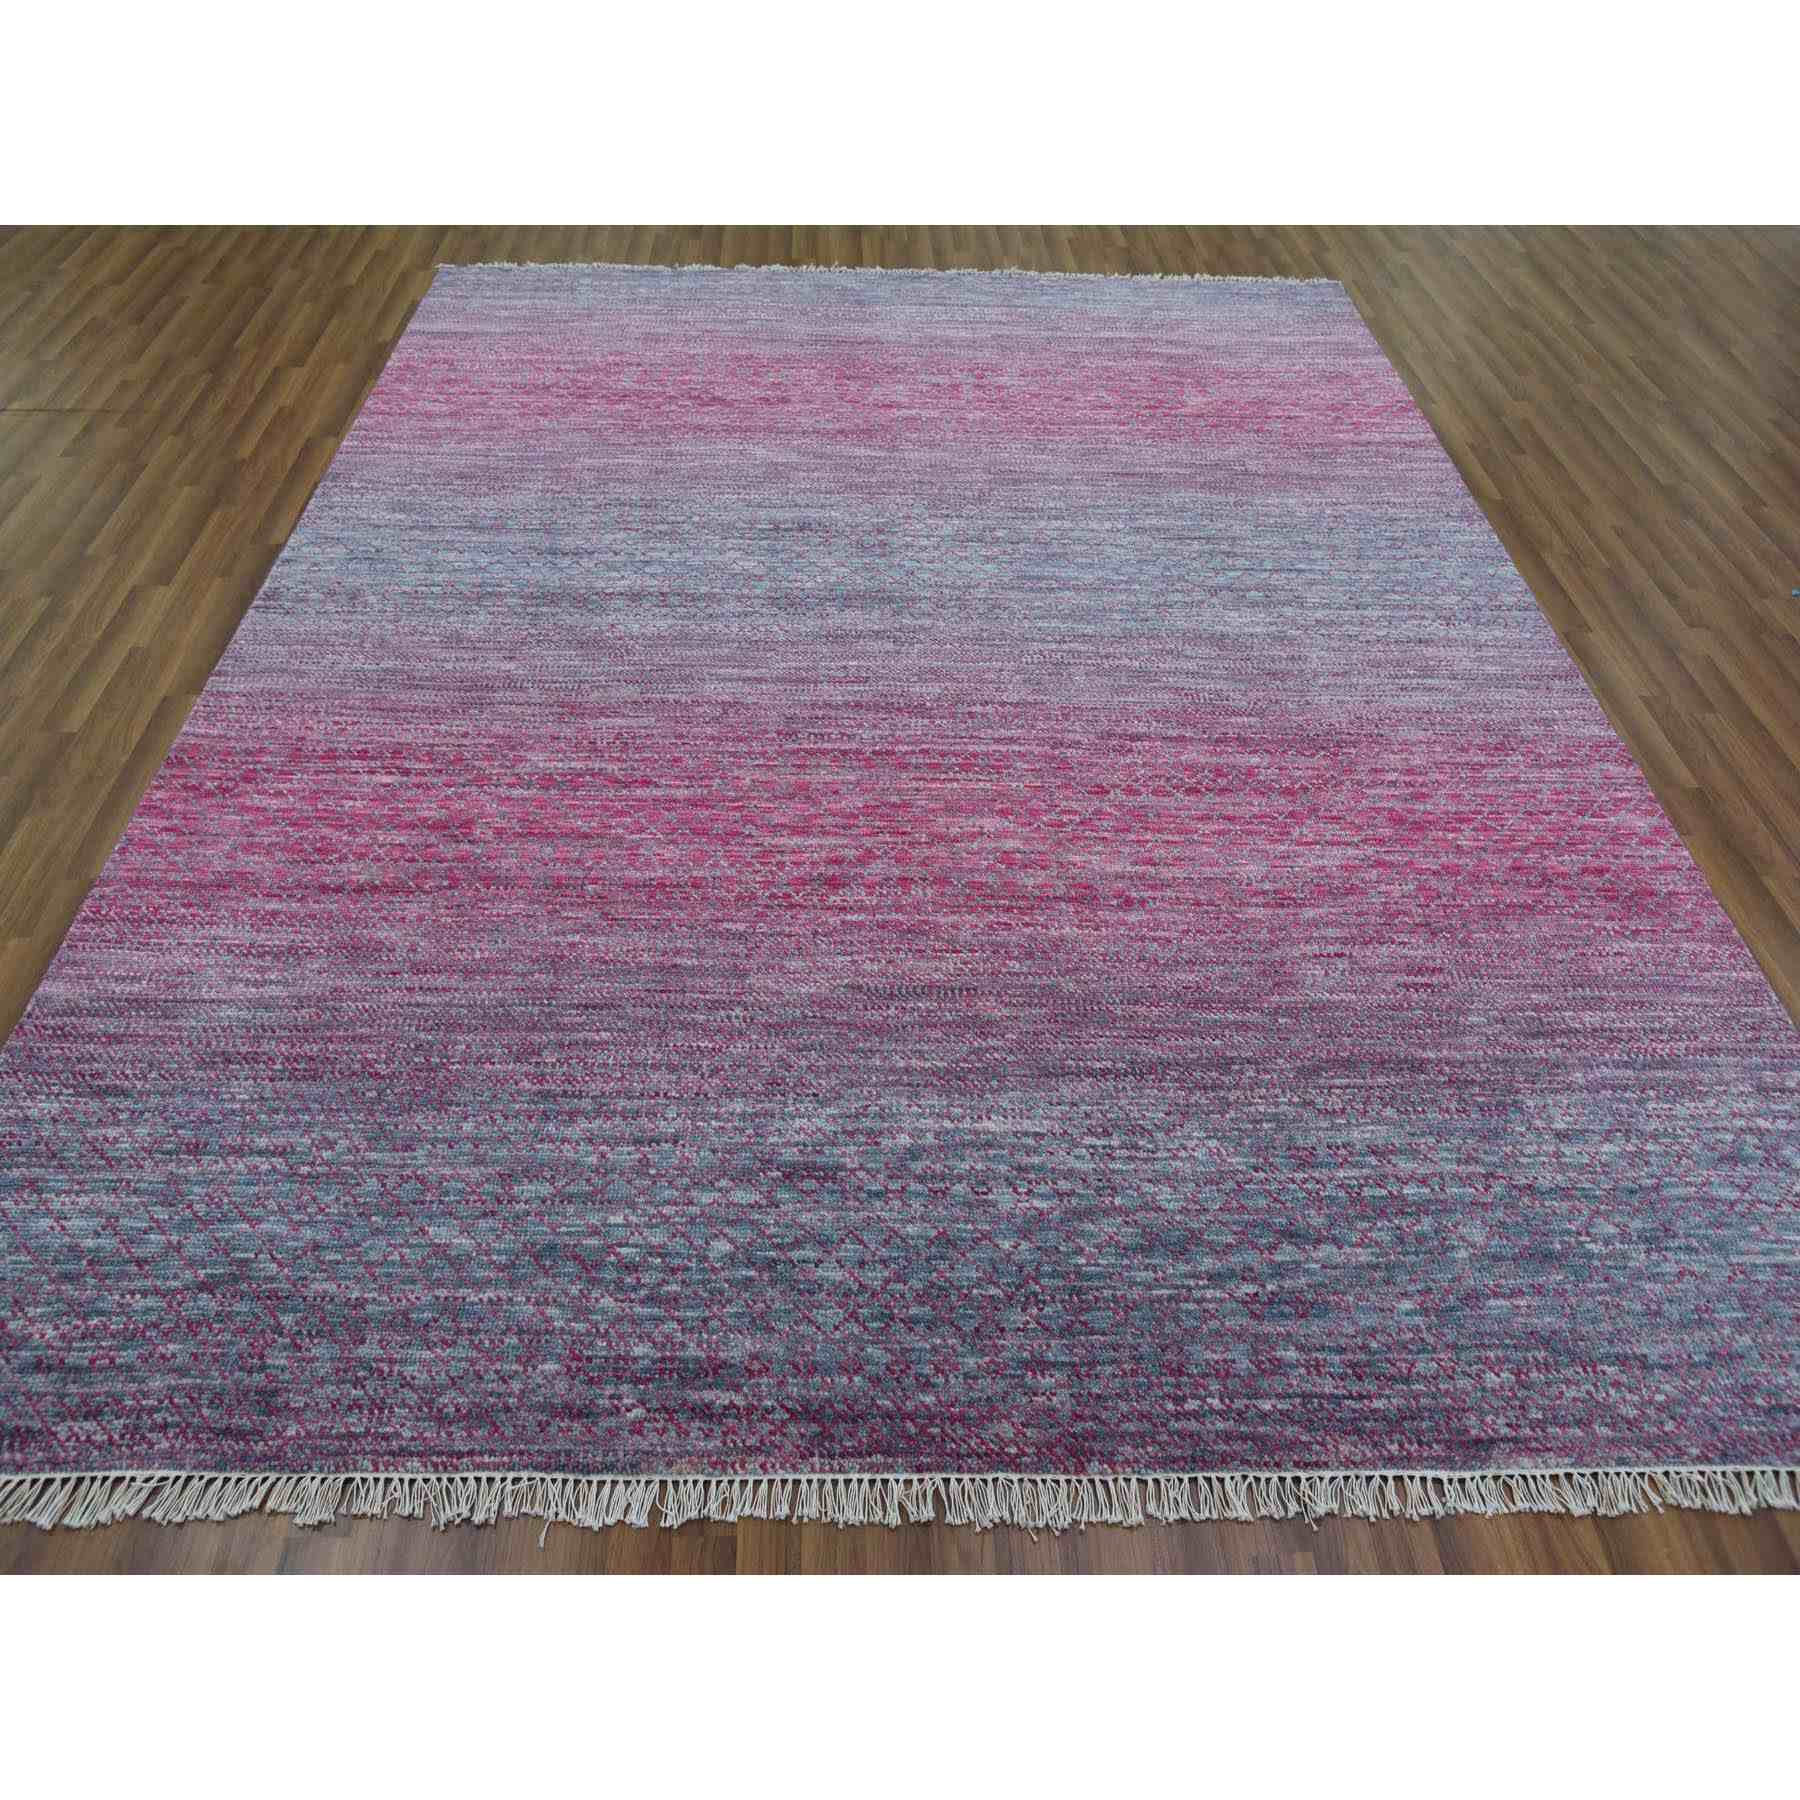 Modern-and-Contemporary-Hand-Knotted-Rug-395970